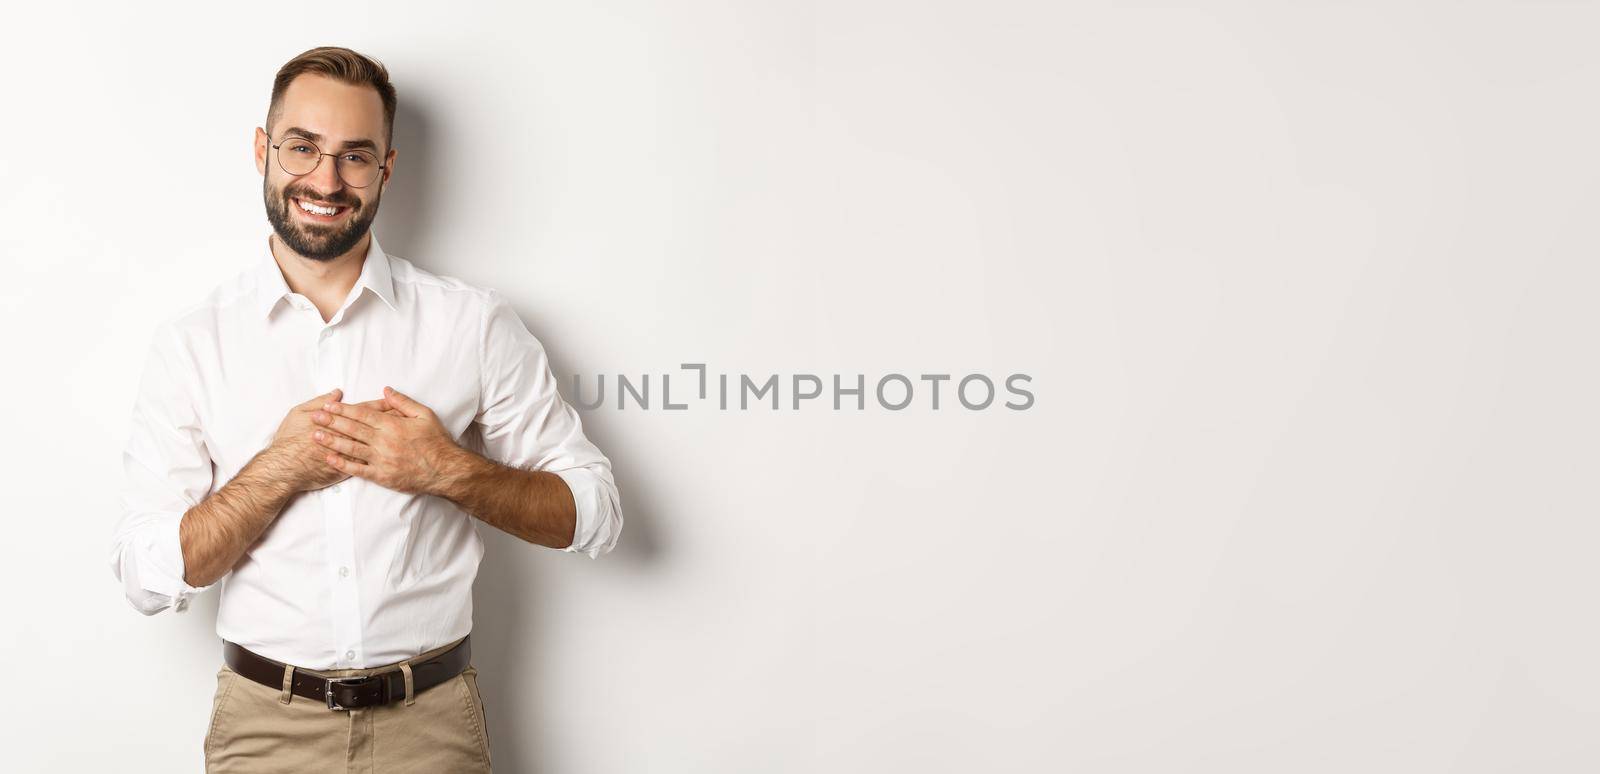 Touched and thankful business man holding hands on heart, smiling grateful, standing against white background.